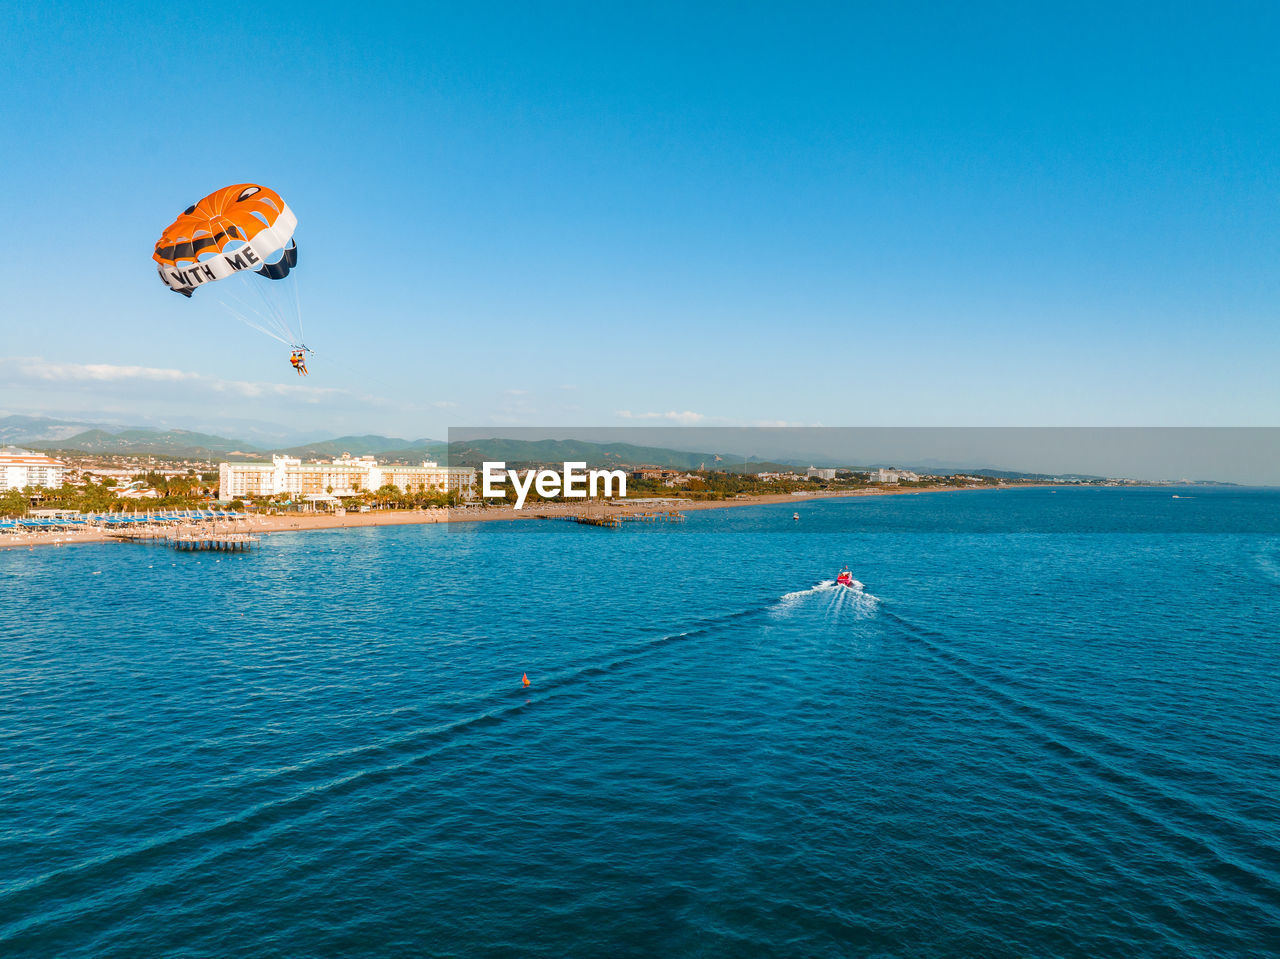 Aerial panoramic view of parasailing in turkey.